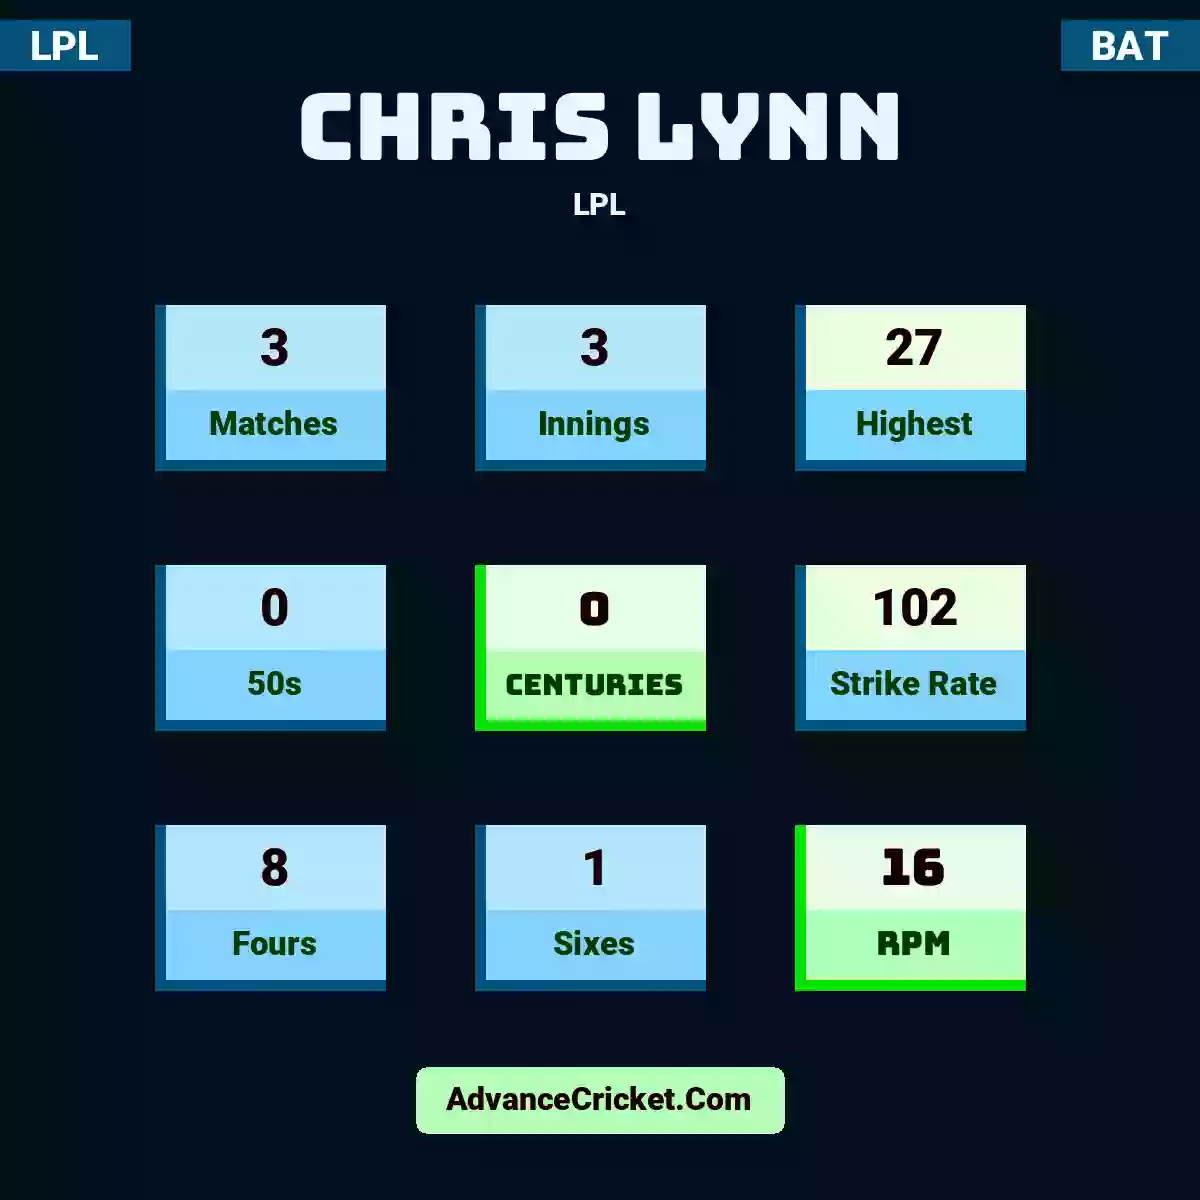 Chris Lynn LPL , Chris Lynn played 3 matches, scored 27 runs as highest, 0 half-centuries, and 0 centuries, with a strike rate of 102. C.Lynn hit 8 fours and 1 sixes, with an RPM of 16.